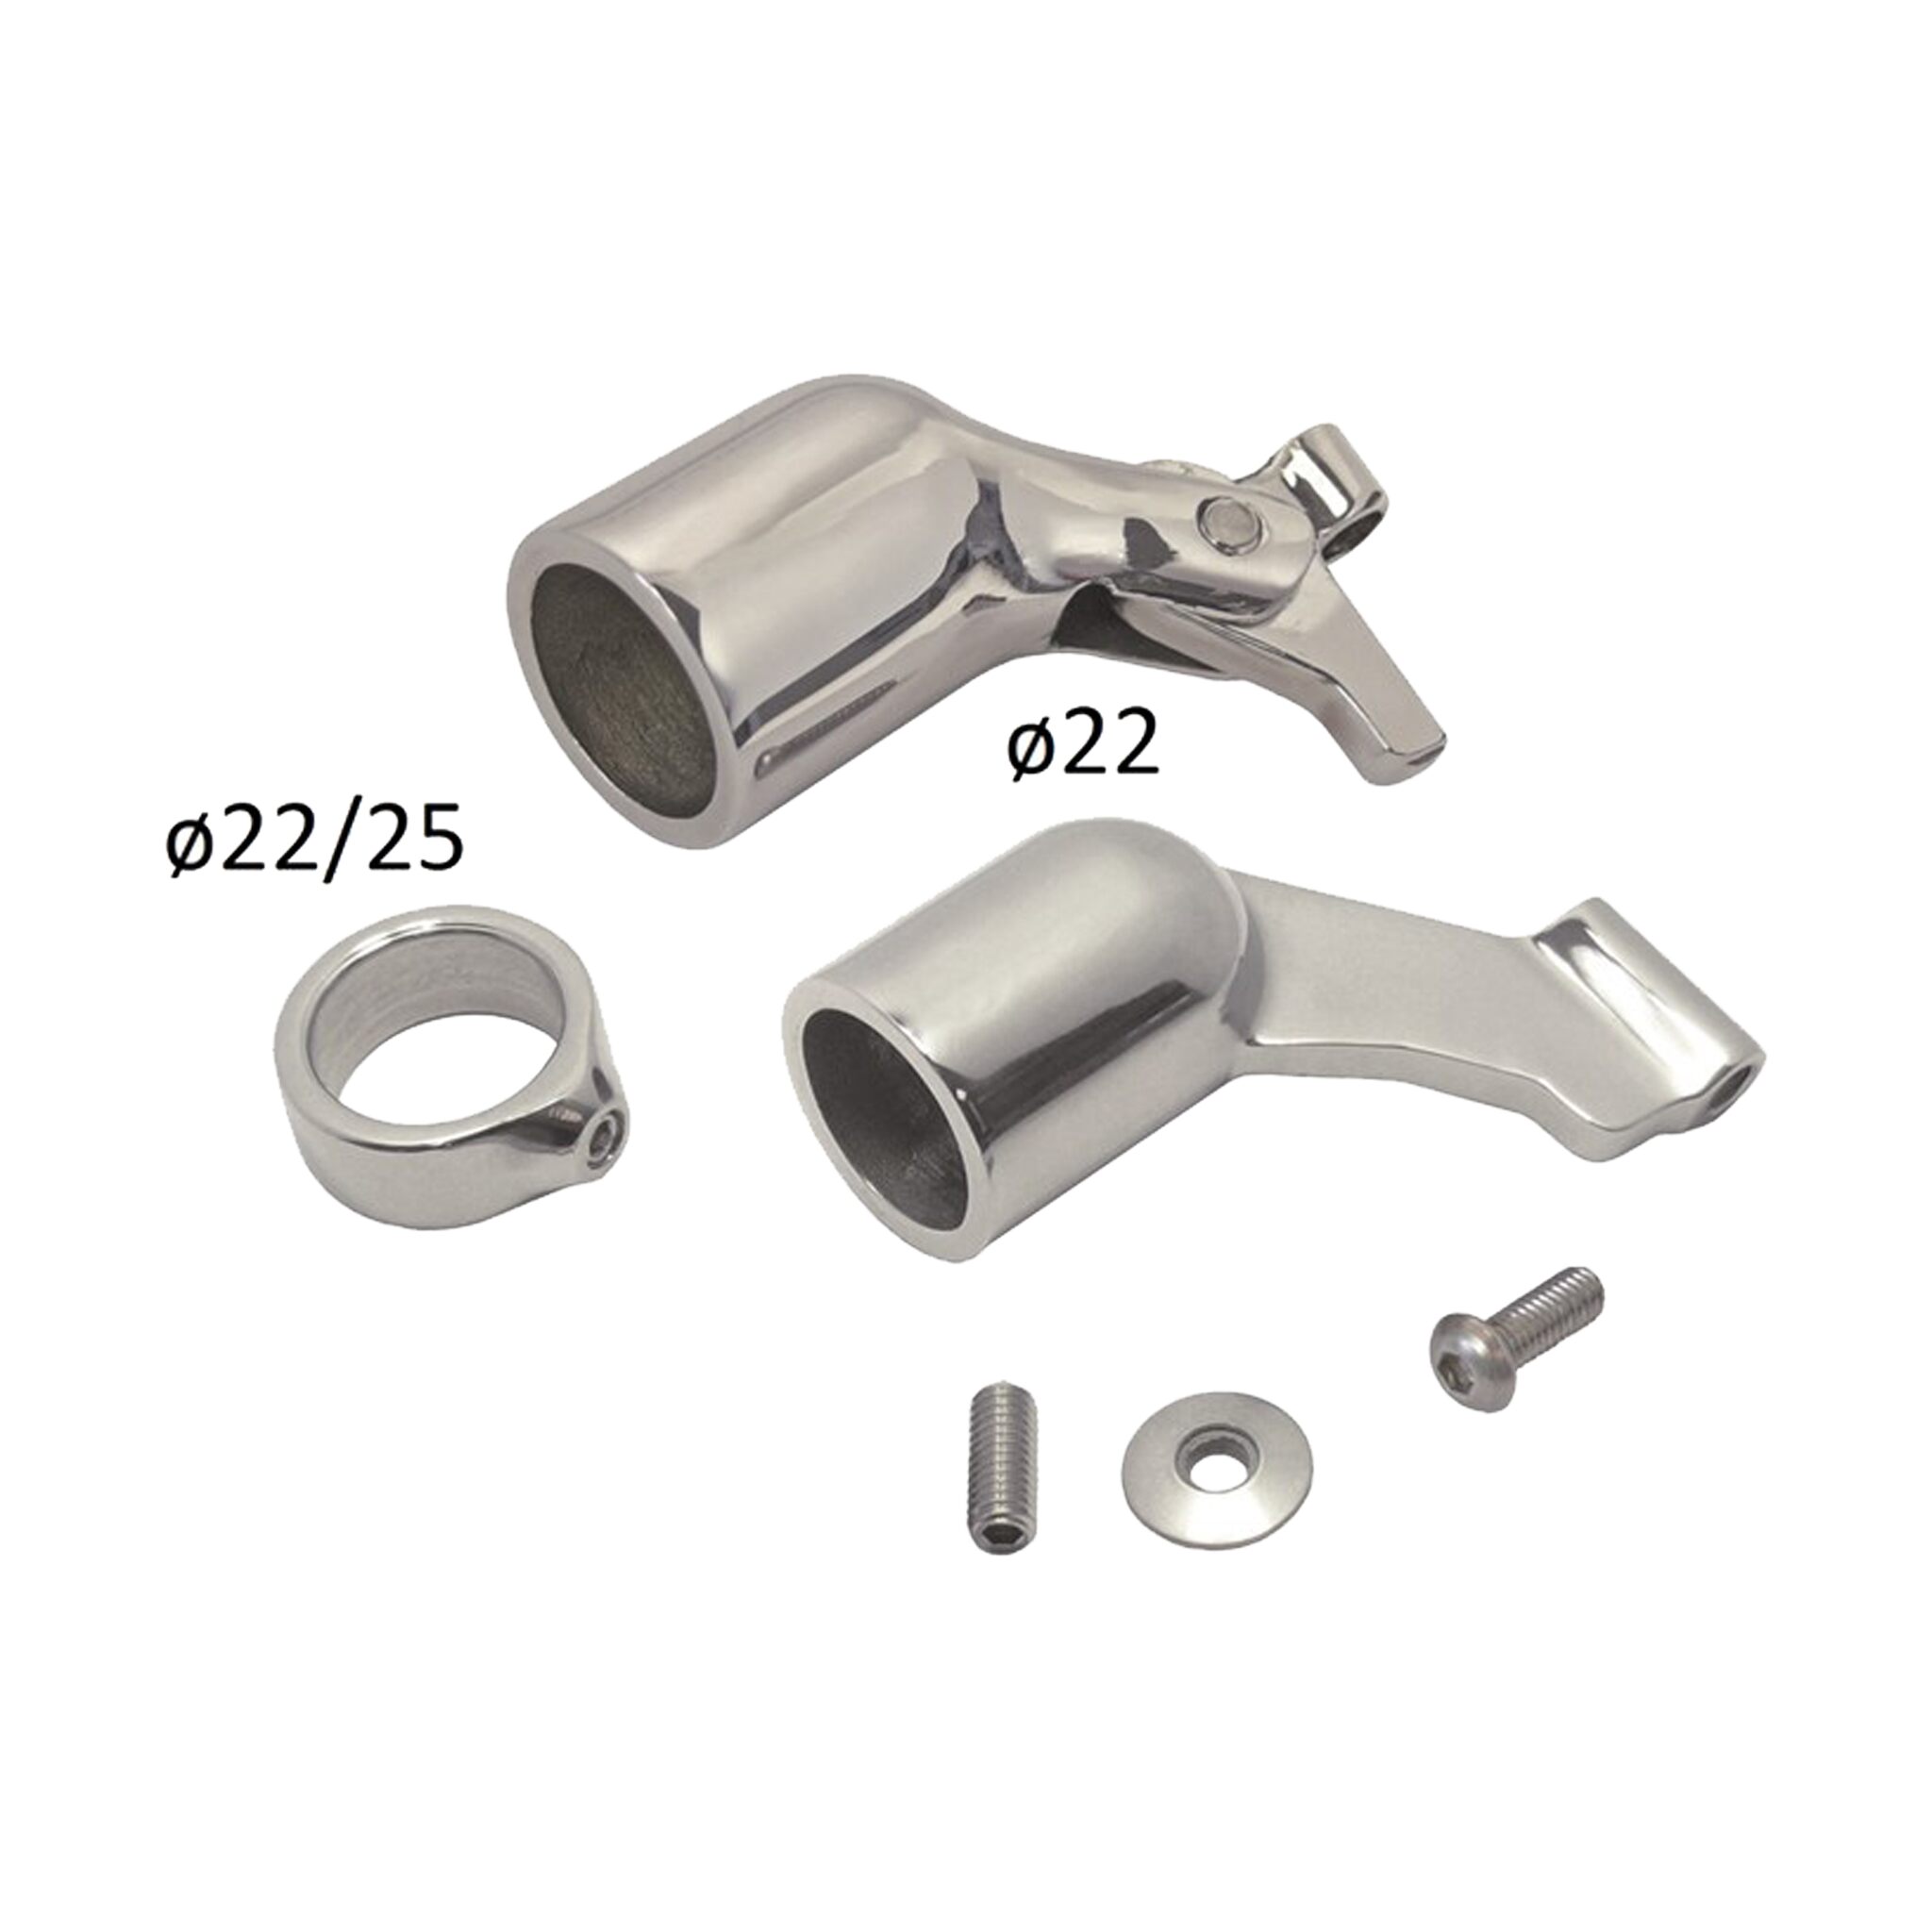 SK handrail bracket set 22 mm with joint